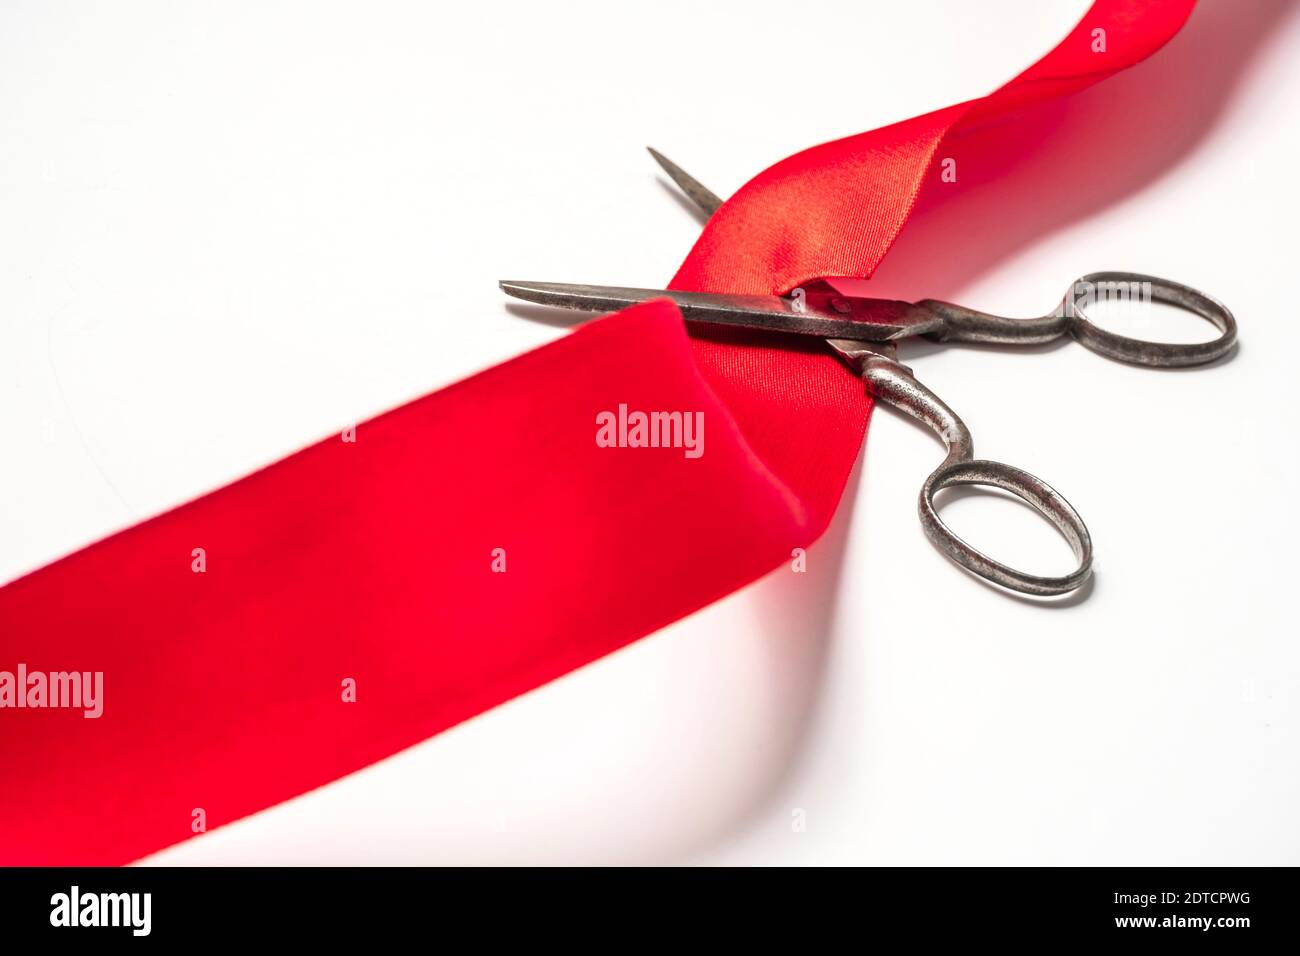 Studio shot of old fashioned scissors cutting red ribbon Stock Photo